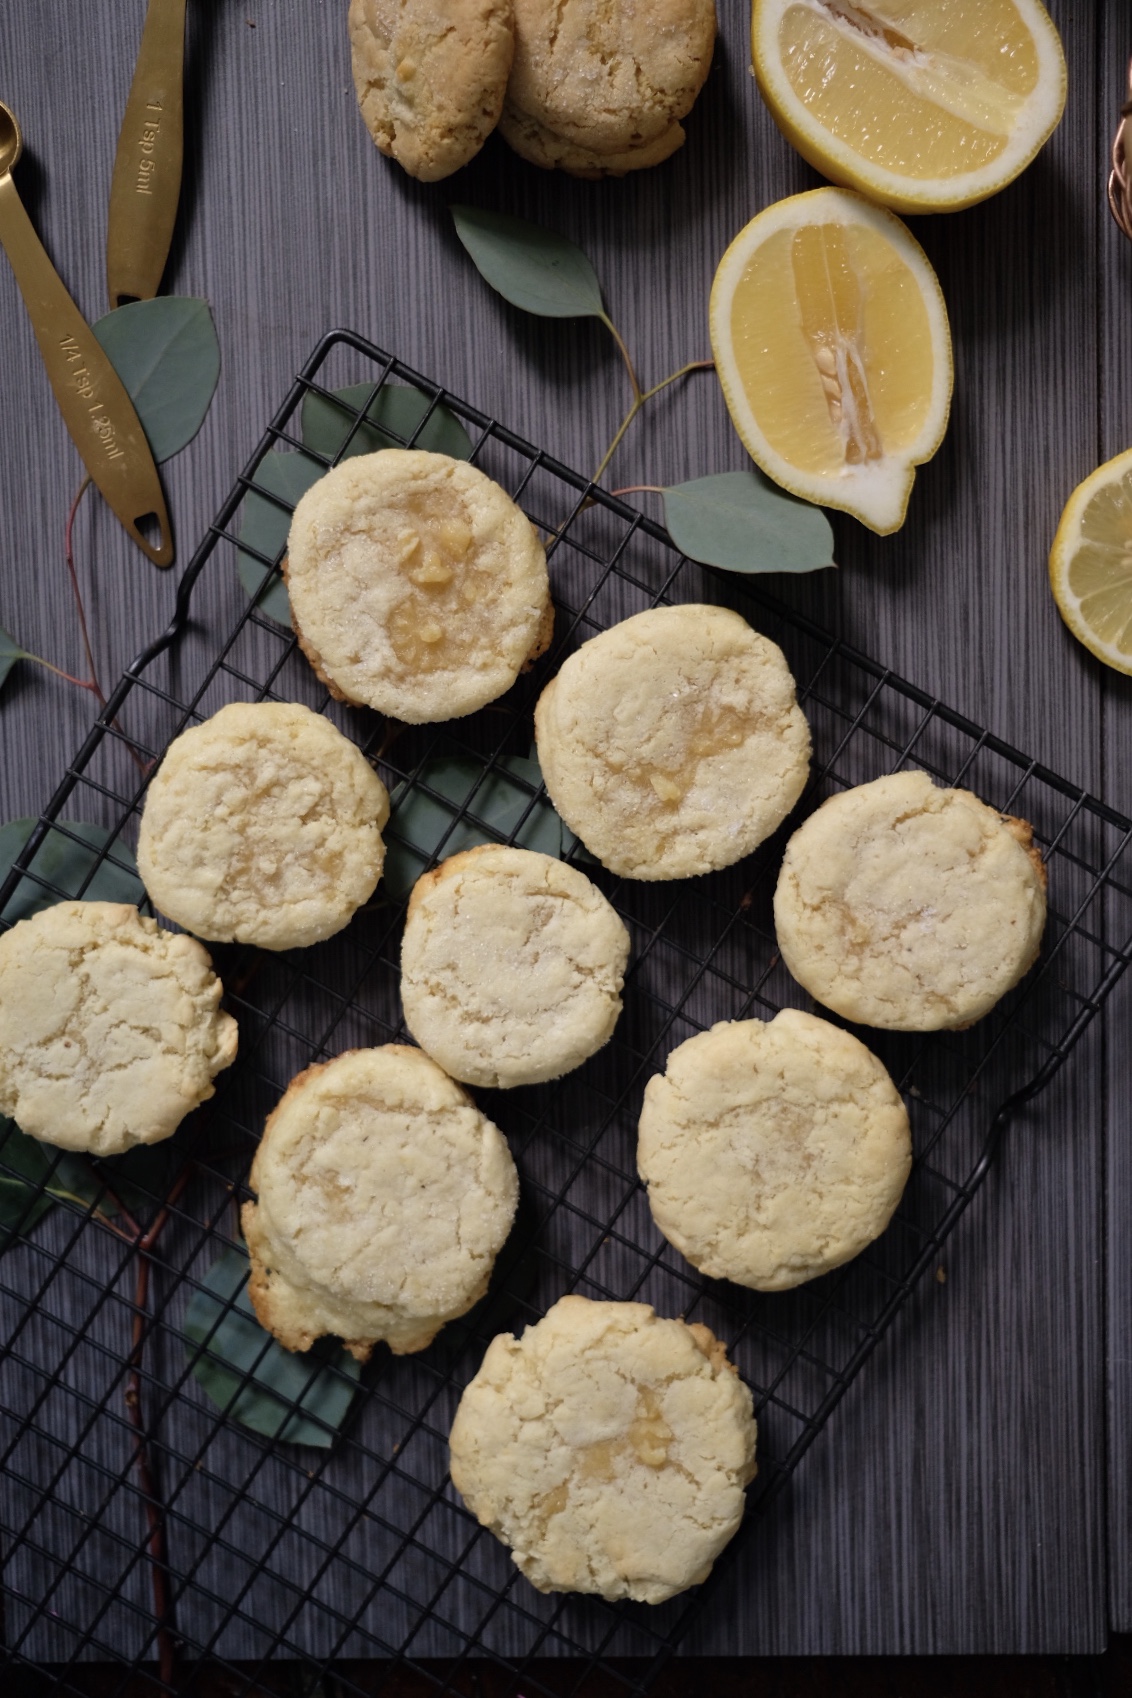 Lifestyle Blogger Chocolate & Lace shares her recipe for Chewy Lemon Sugar Cookies